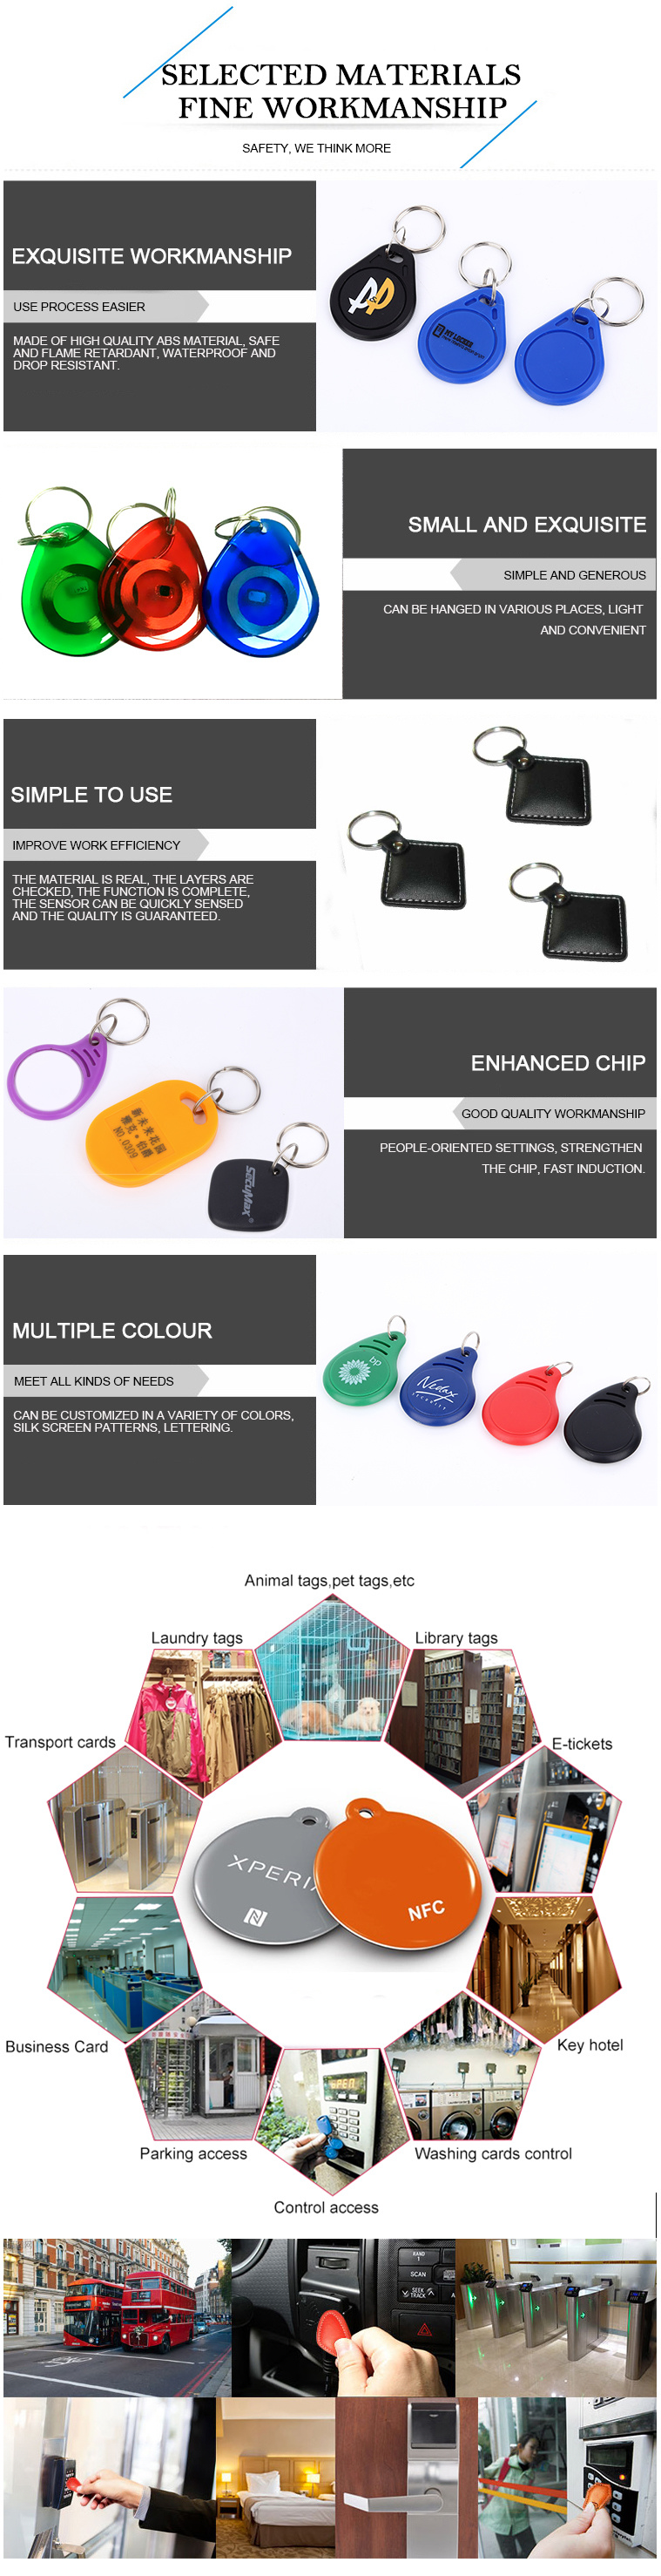 Low Price ISO14443A RFID ABS Plastic Keyfob for Elevator Access